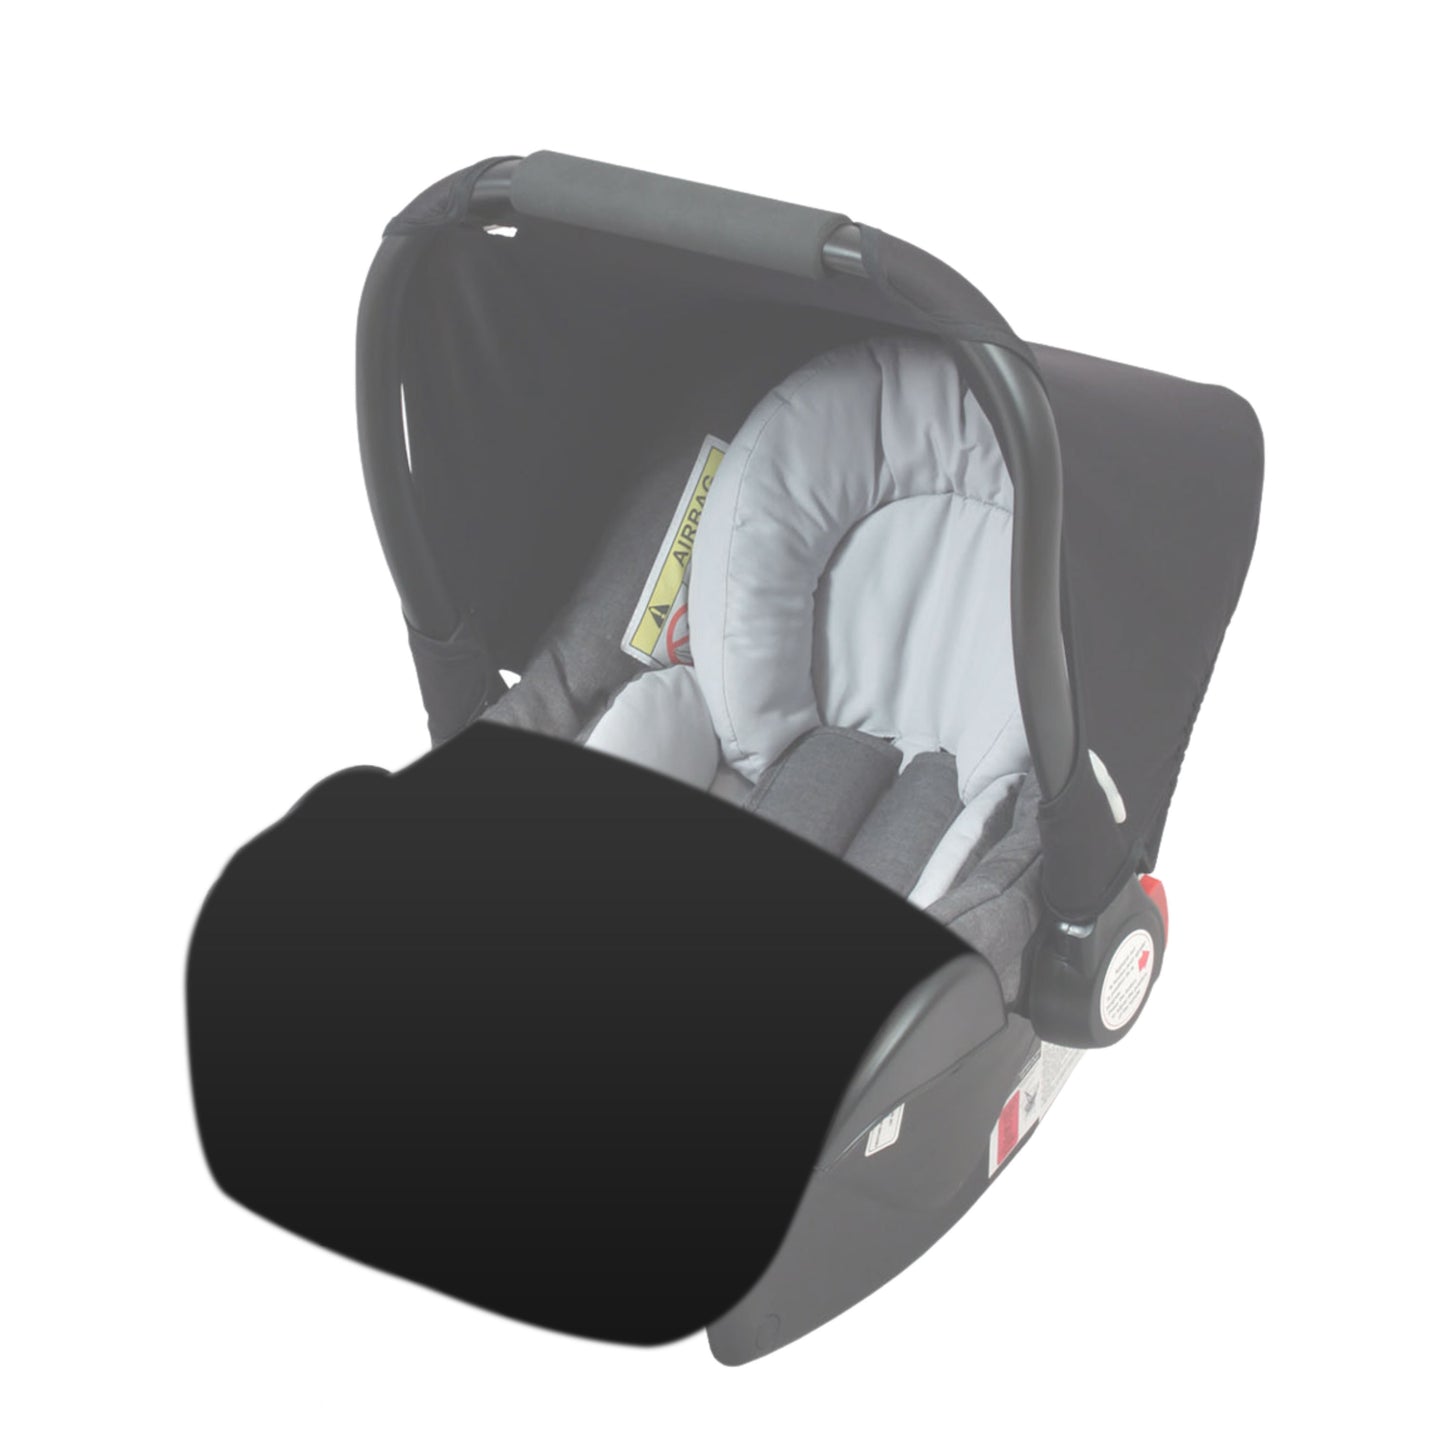 Squizz carseat foot warmer